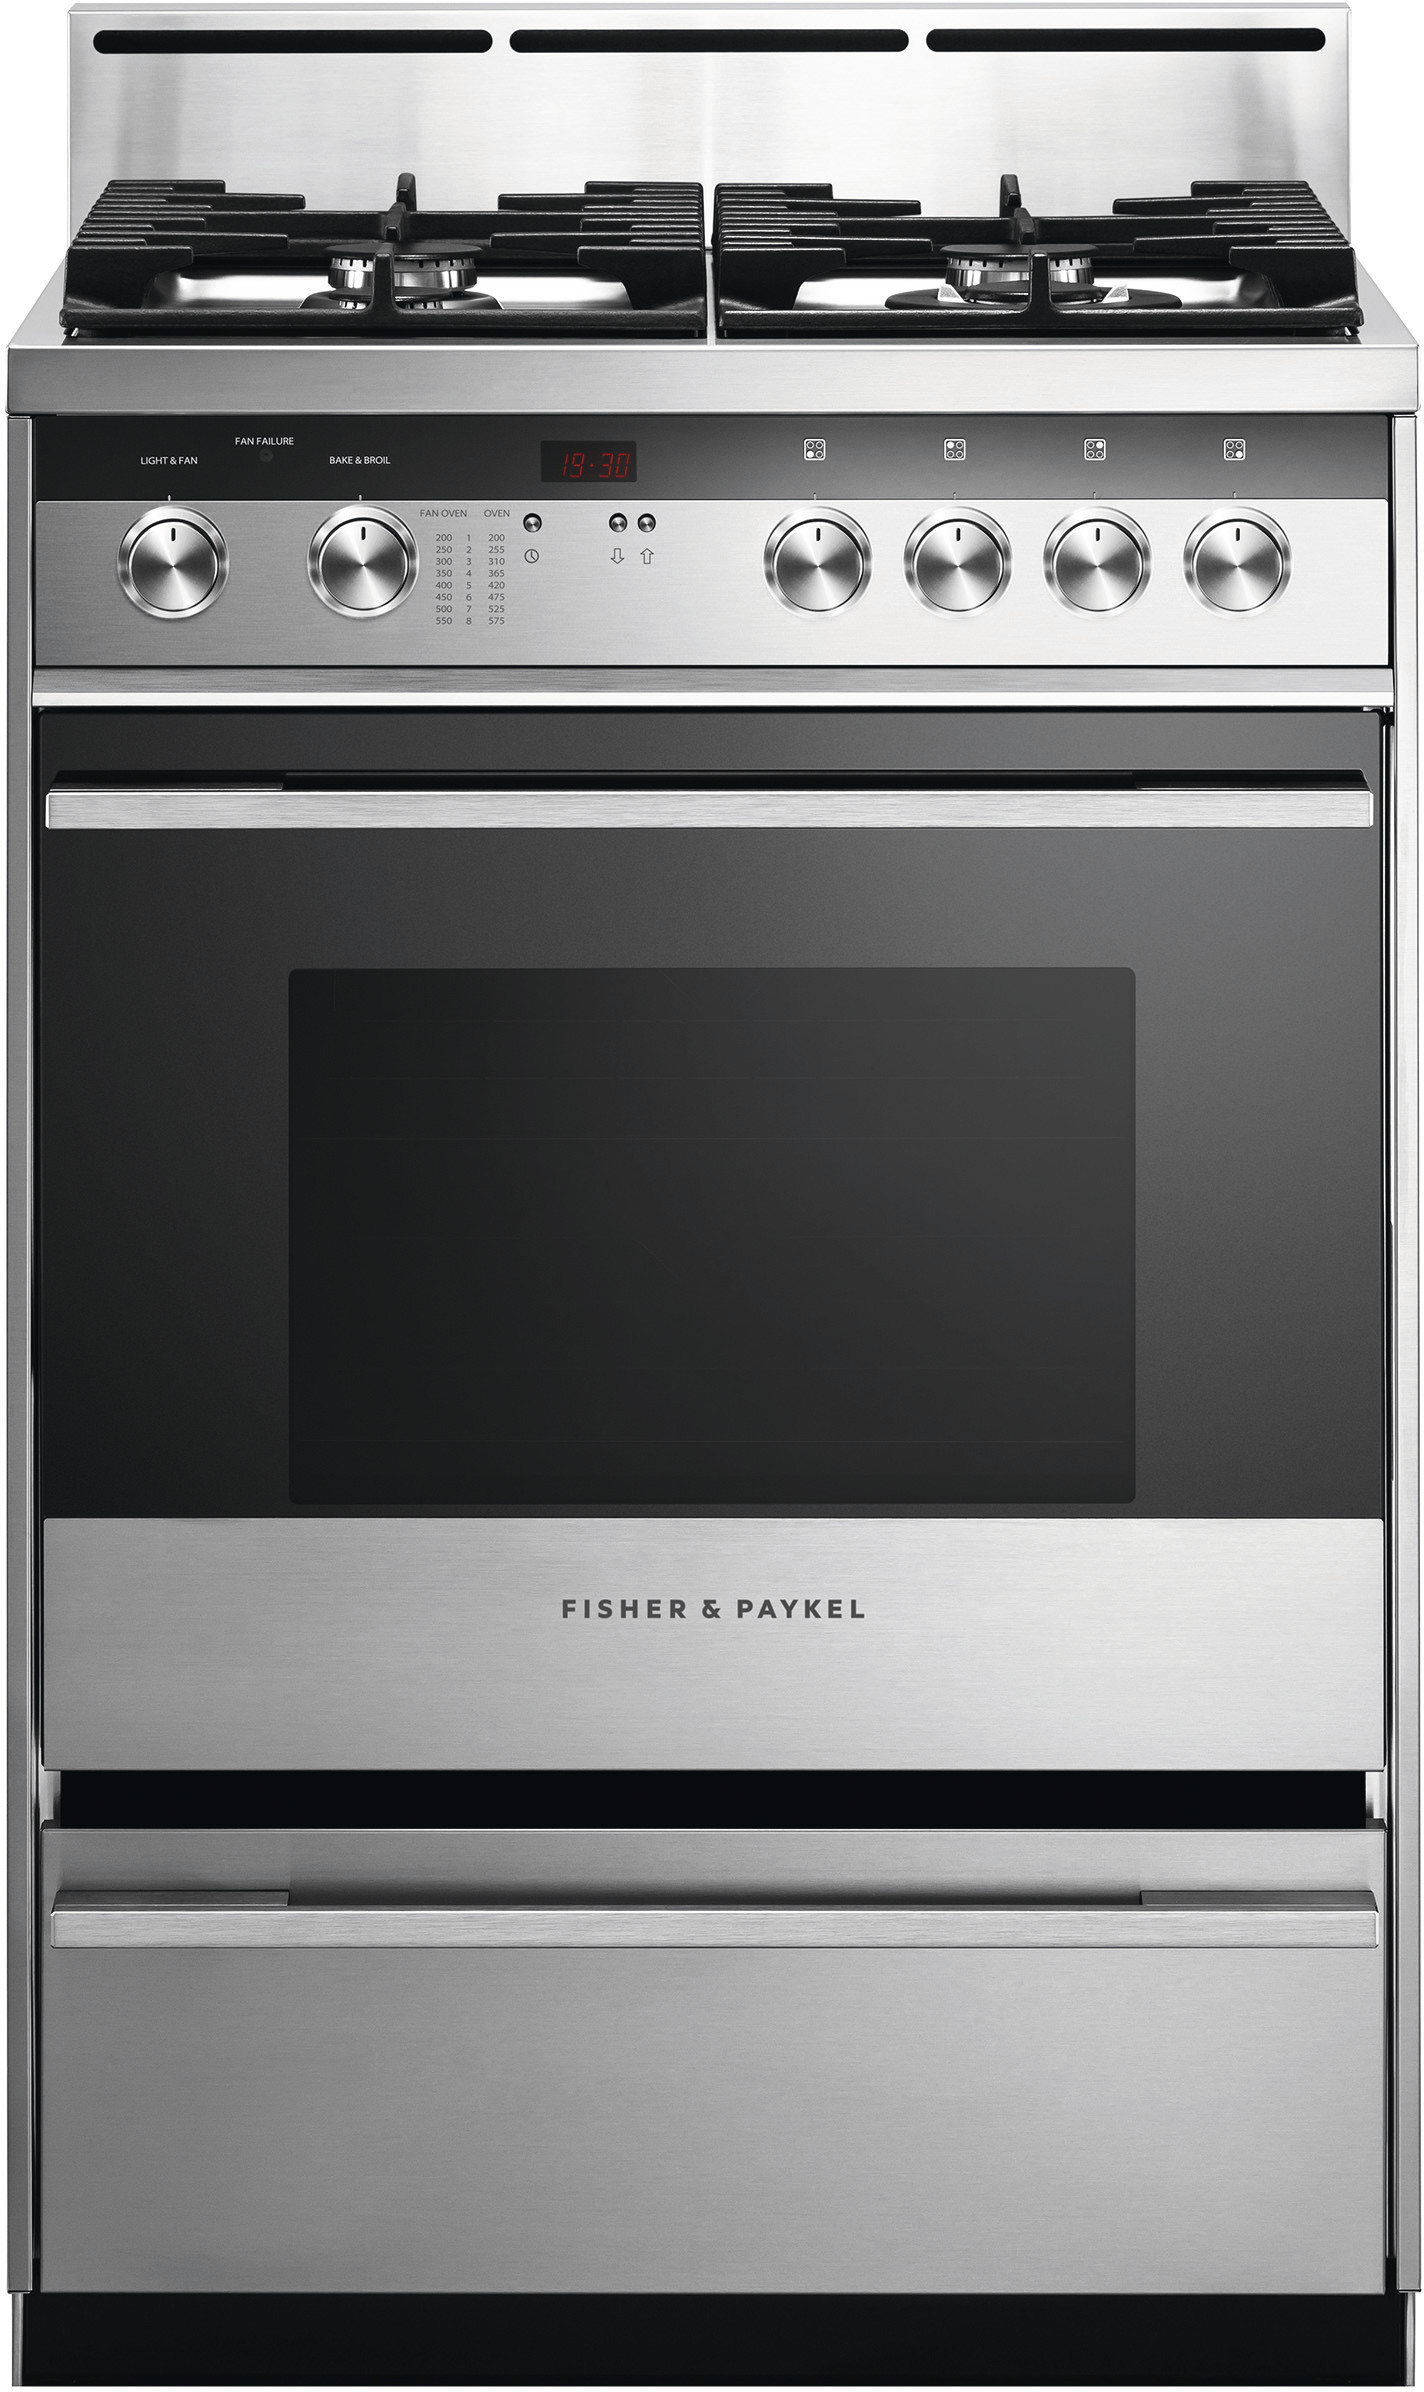 Fisher & Paykel Series 5 Contemporary 24"" Freestanding Natural Gas Range OR24SDMBGX2N -  OR24SDMBGX2 N